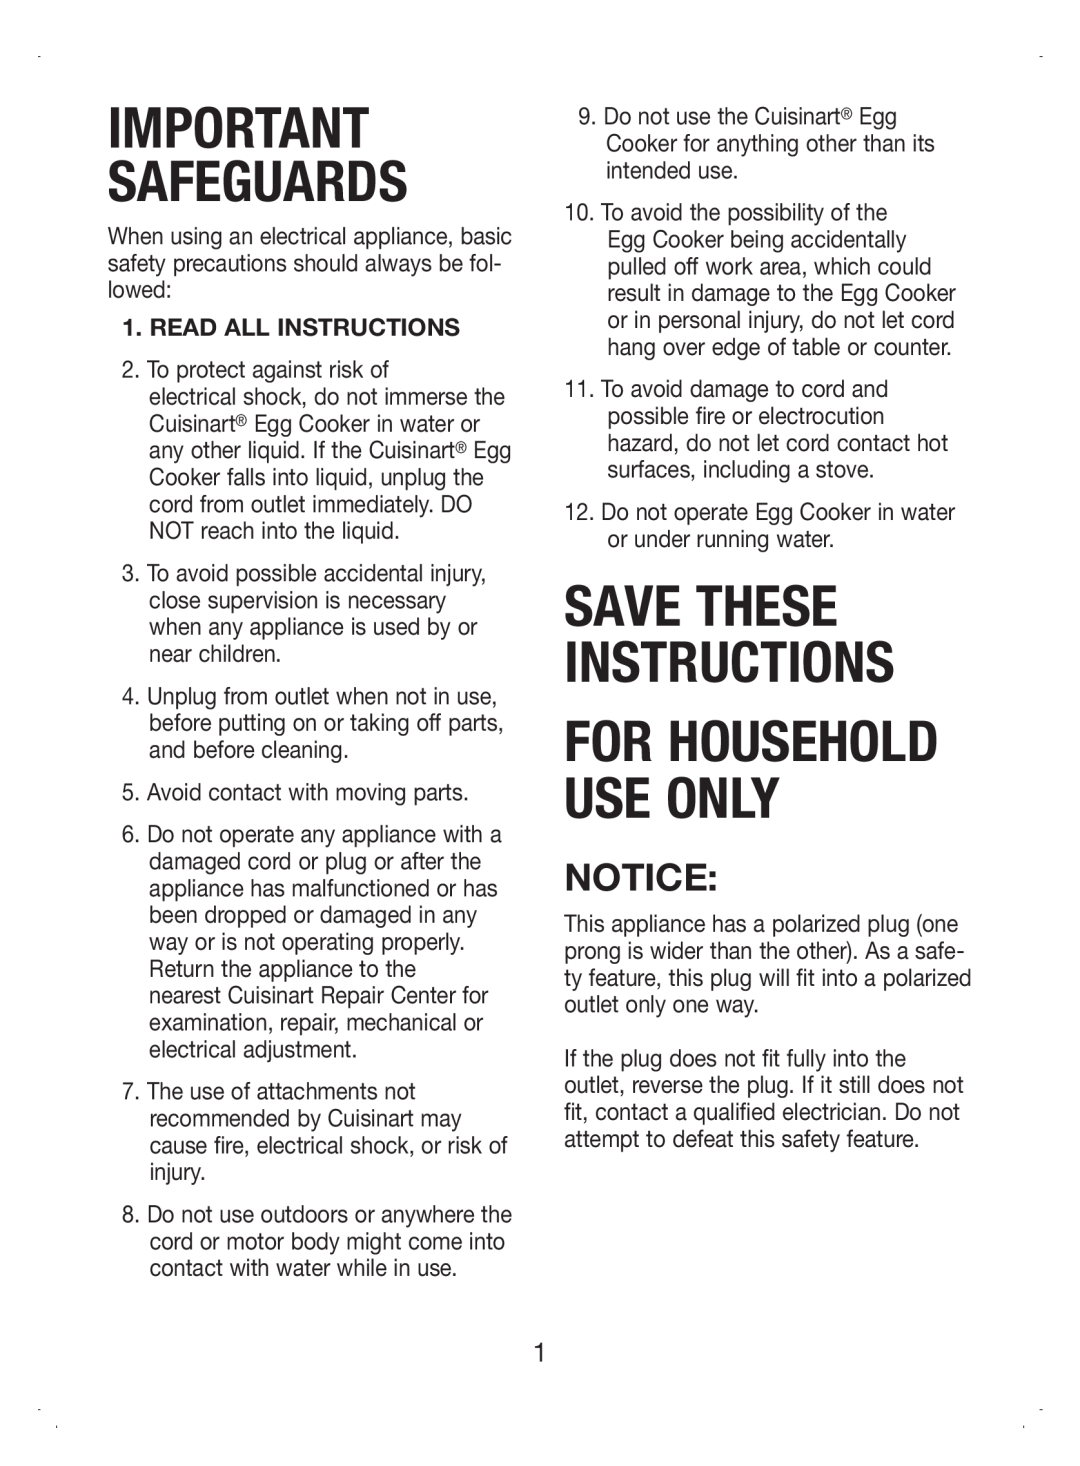 Cuisinart CEC-7 manual Safeguards, Save These Instructions, For Household Use Only 